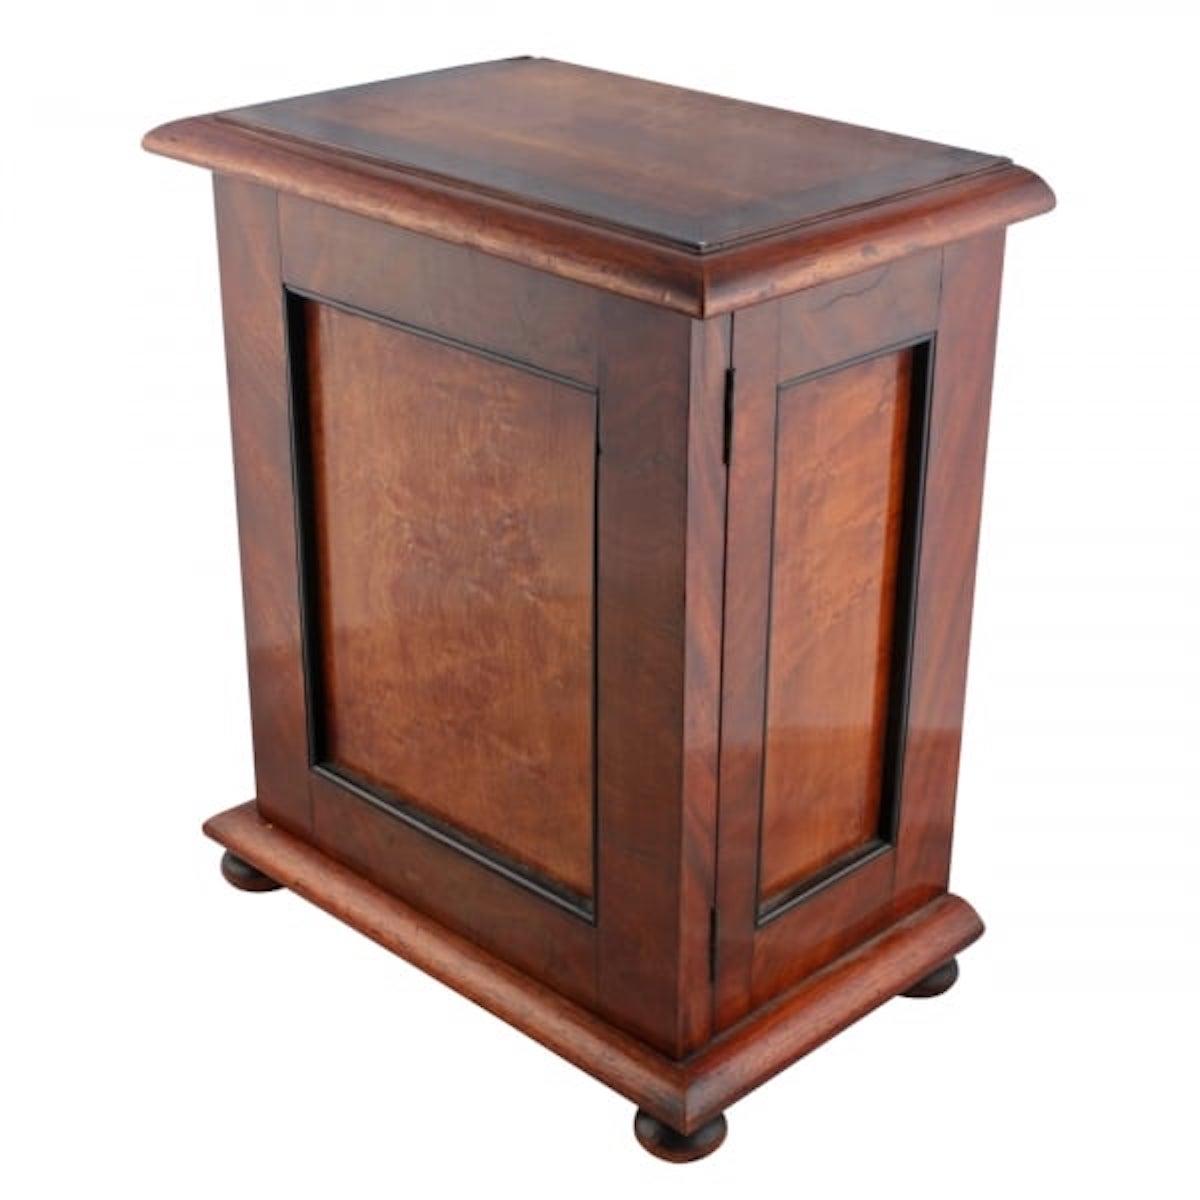 A middle of the 19th century mahogany table cabinet.

The cabinet has panels of birds eye maple and the door and side panels have ebony beading.

The interior has two short drawers and three long drawers that are mahogany lined and have turned